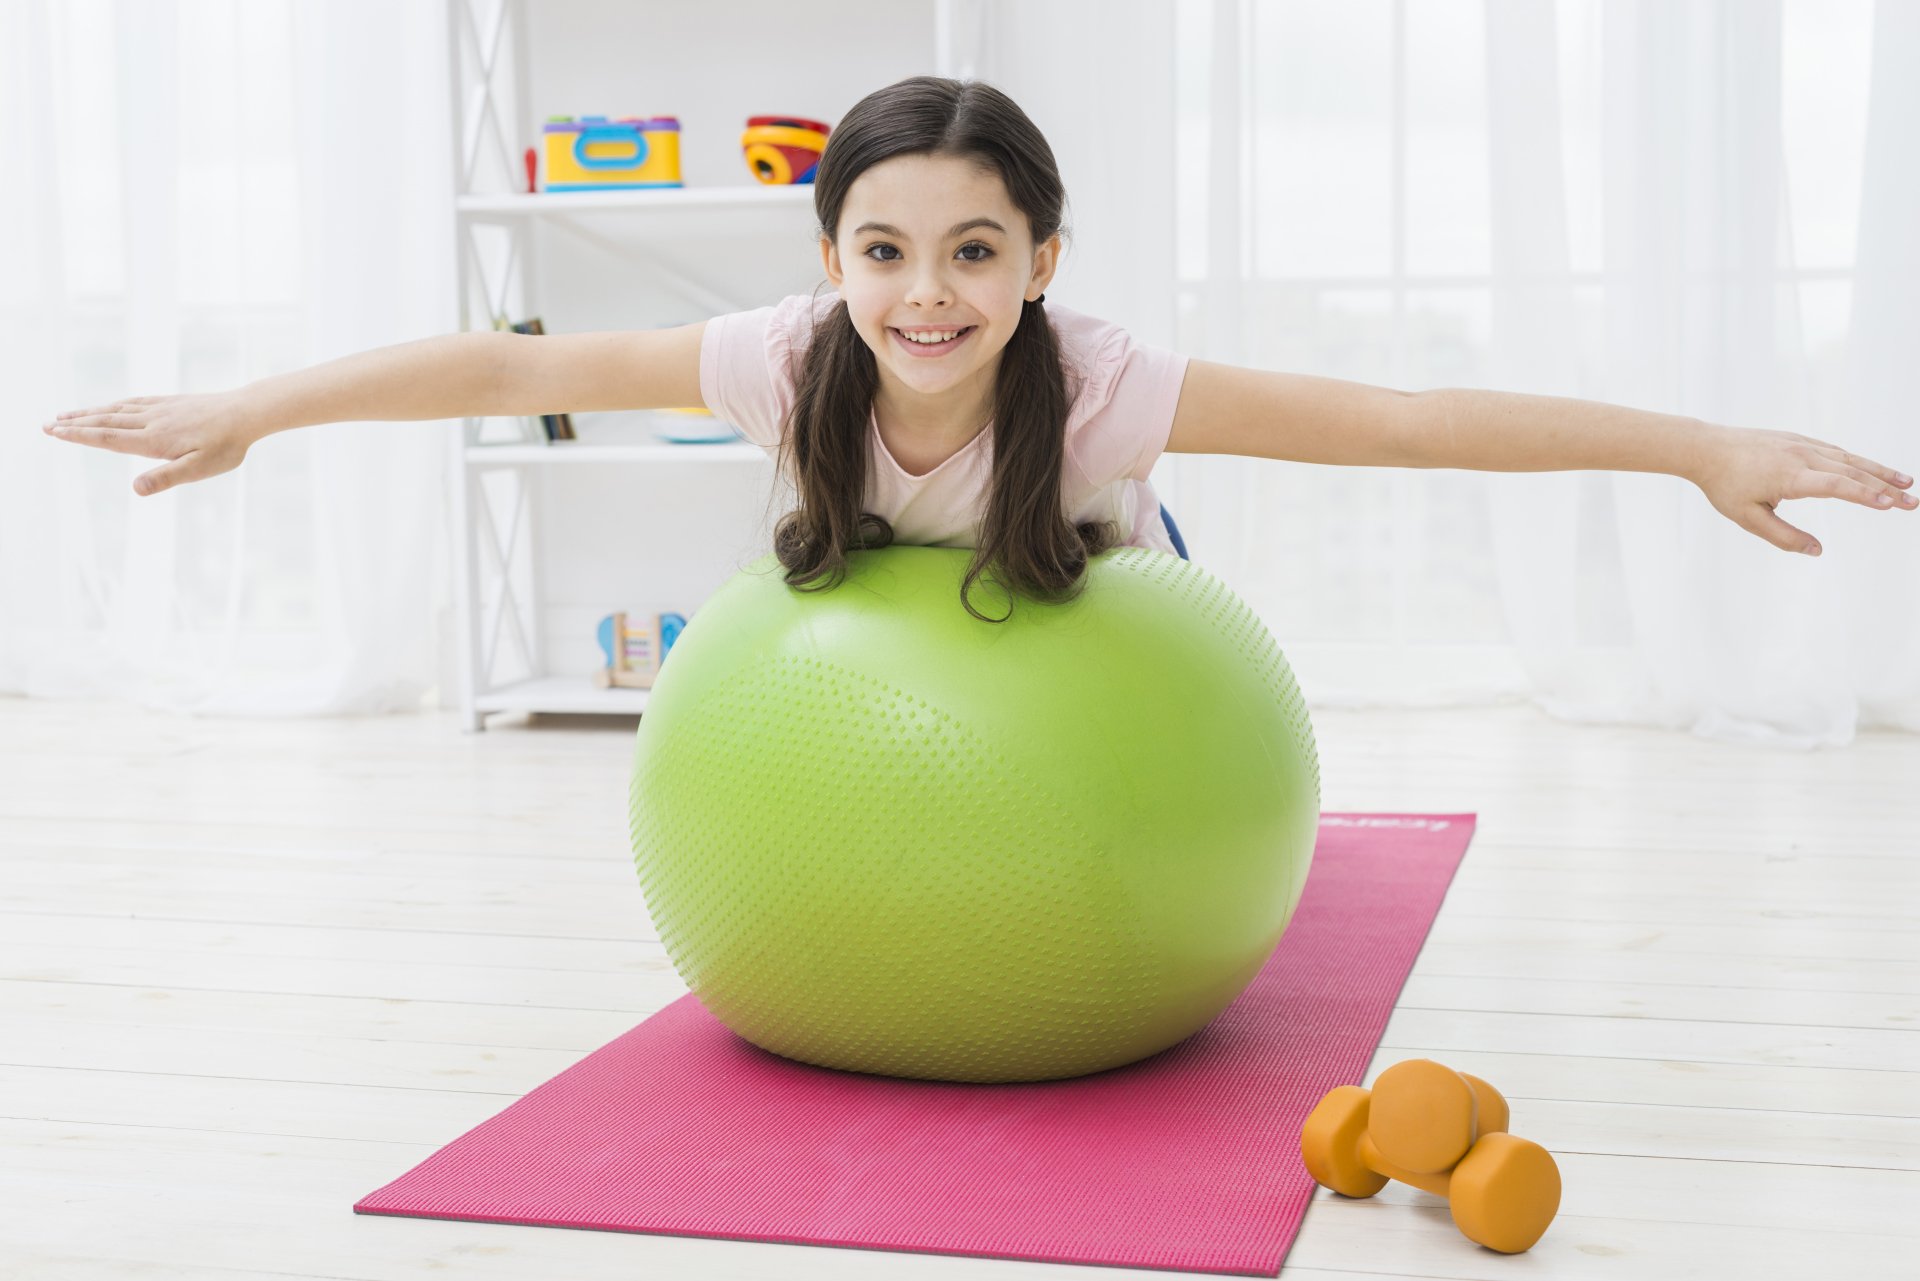 exercises for children in different ages